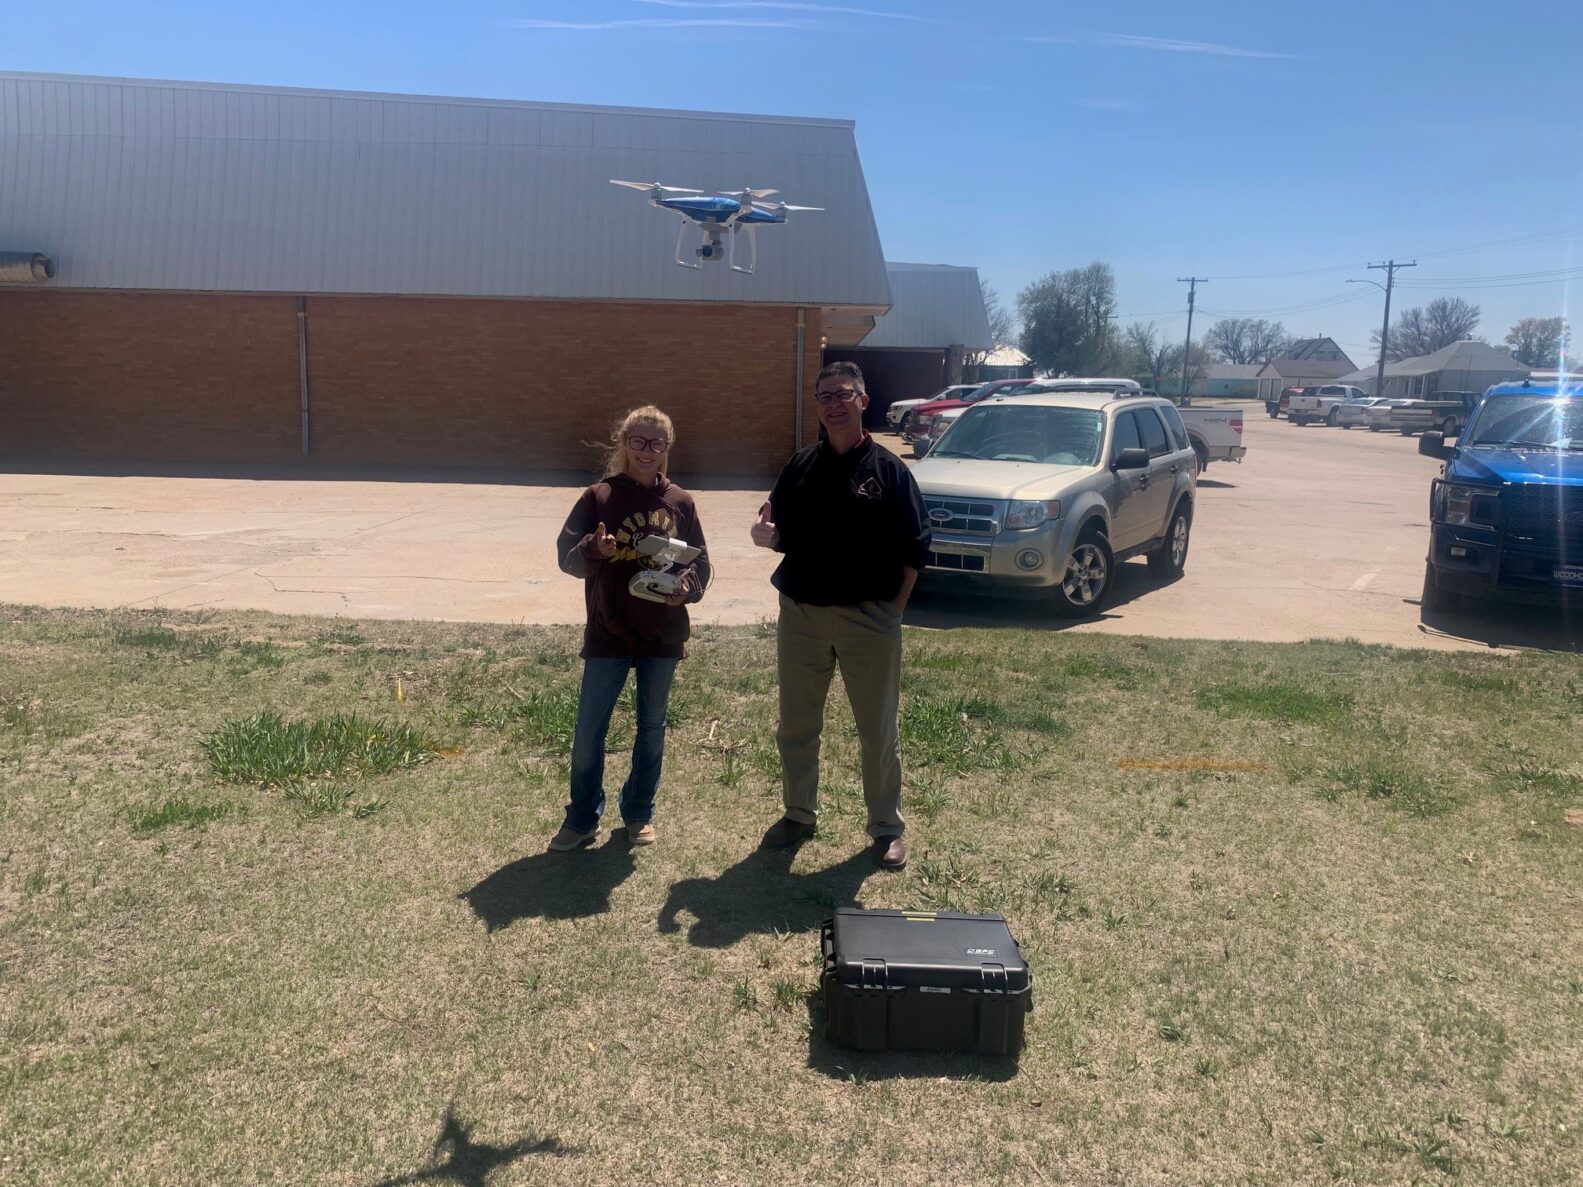 Students a Logan Intergenerational' s drone class learn how to fly a construction drone.